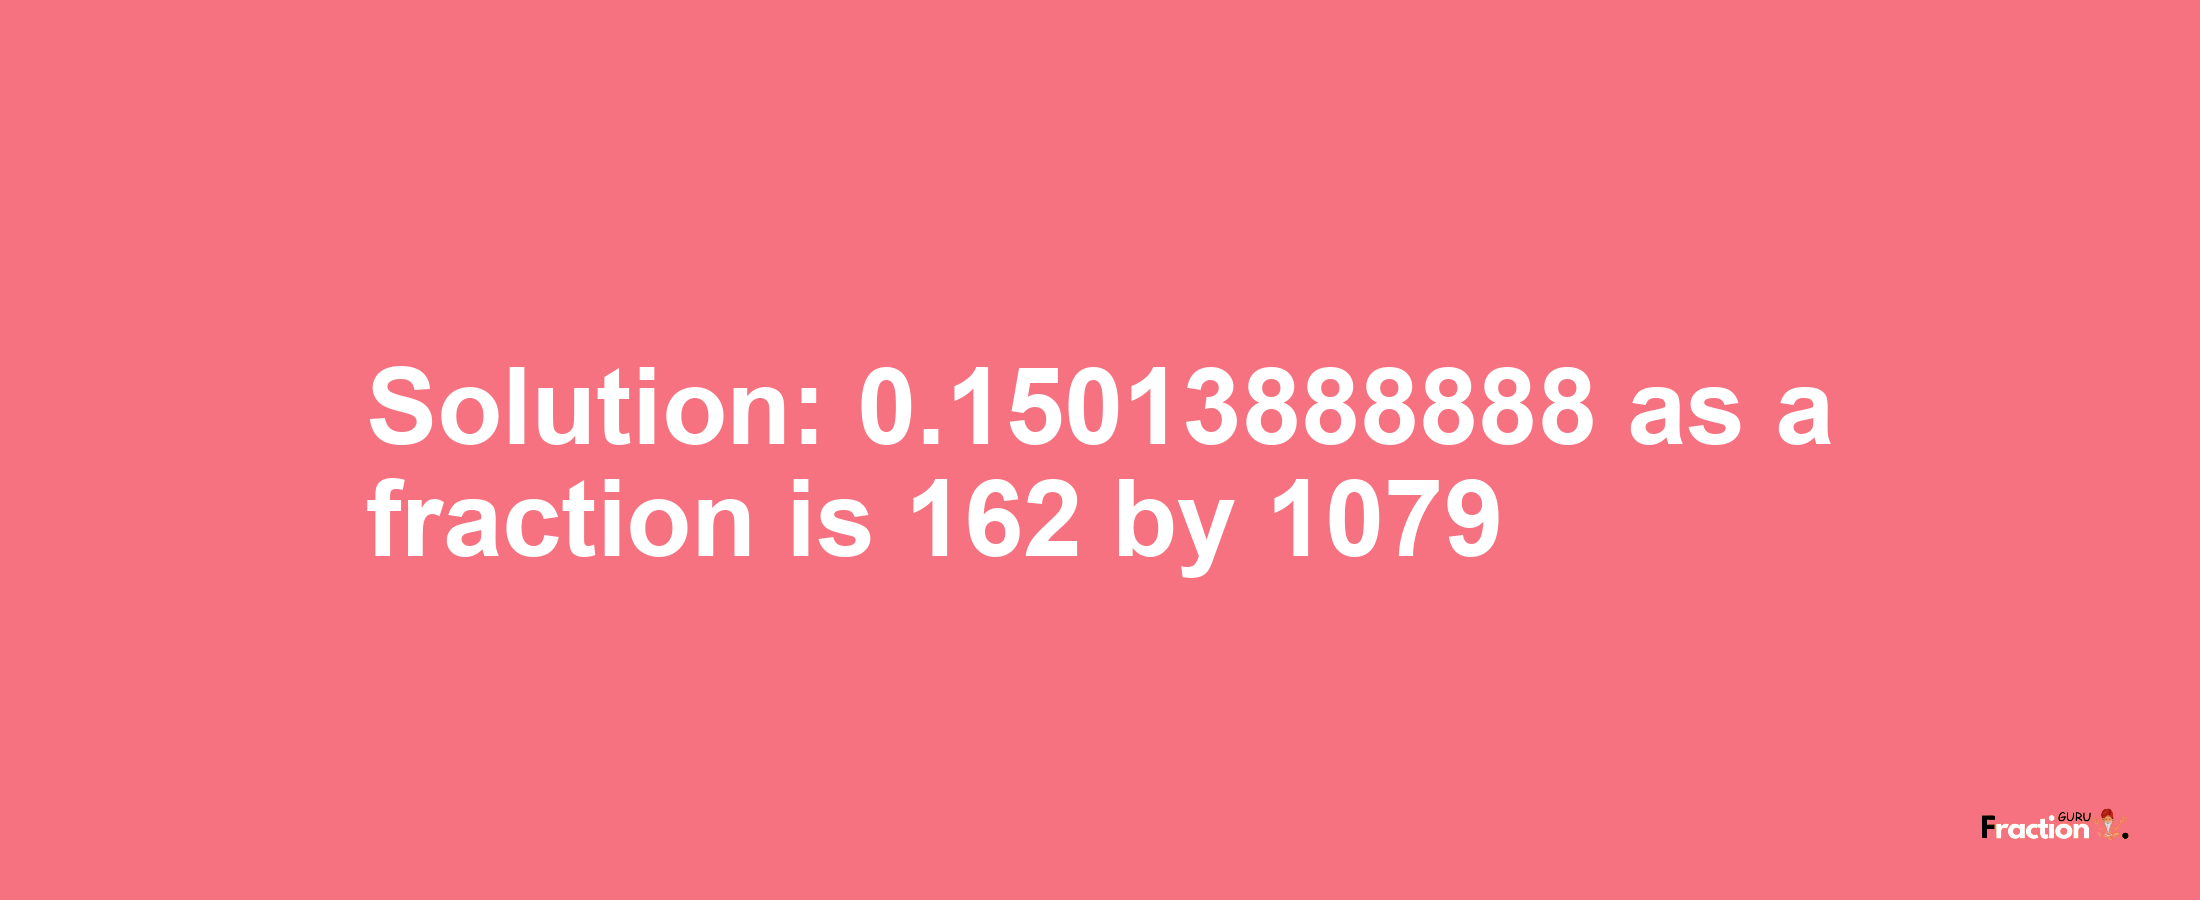 Solution:0.15013888888 as a fraction is 162/1079